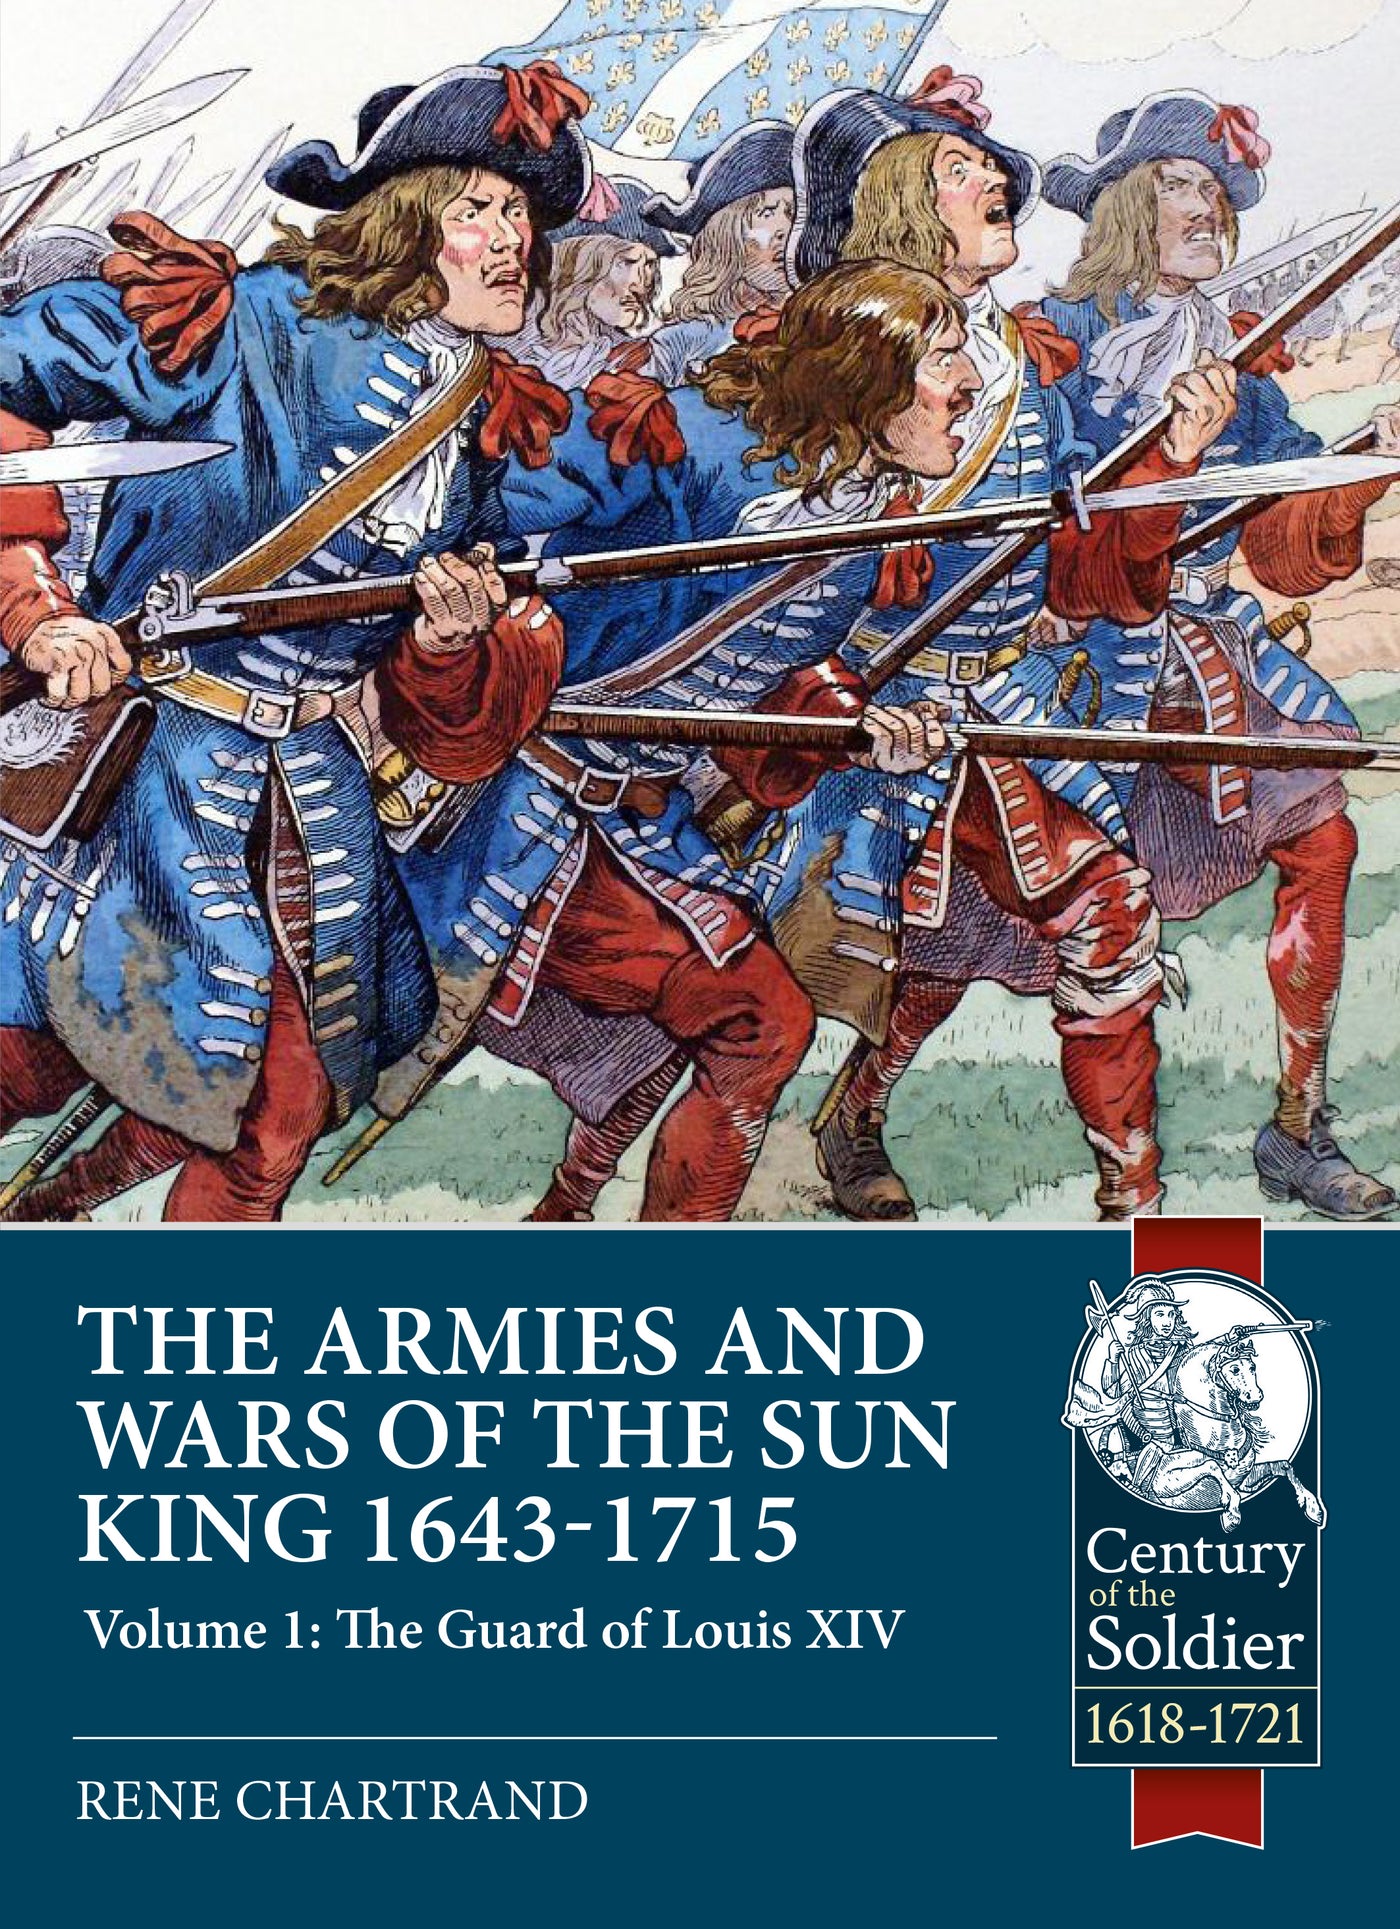 The Armies and Wars of the Sun King 1643-1715. Volume 1